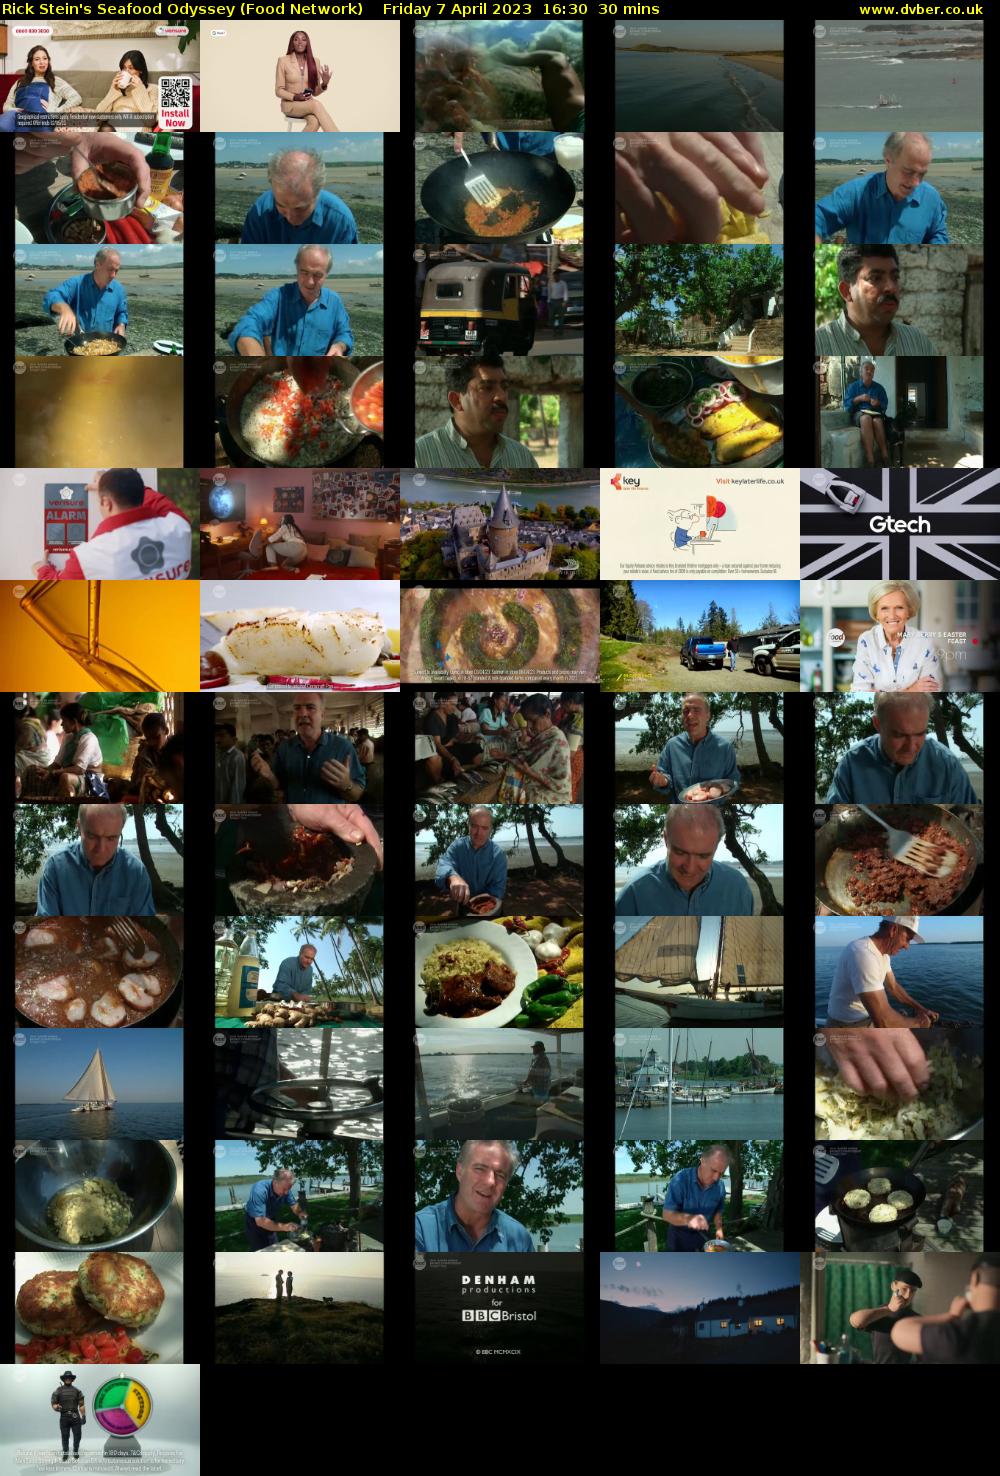 Rick Stein's Seafood Odyssey (Food Network) Friday 7 April 2023 16:30 - 17:00